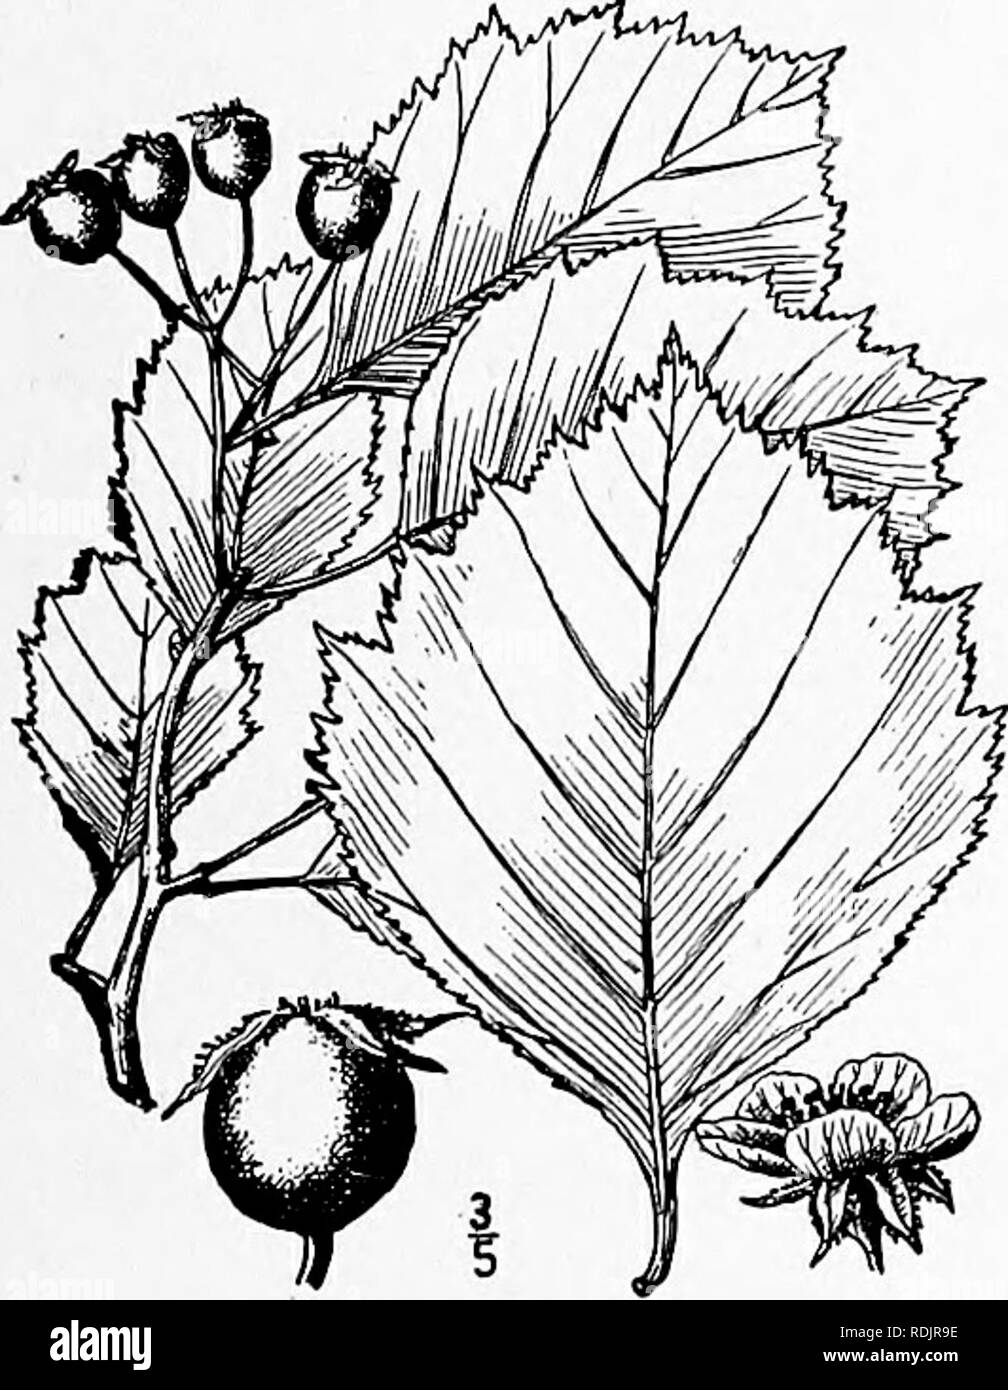 . An illustrated flora of the northern United States, Canada and the British possessions, from Newfoundland to the parallel of the southern boundary of Virginia, and from the Atlantic Ocean westward to the 102d meridian. Botany; Botany. 25. Crataegus Bicknelli Eggleston. Bicknell's Thorn. Fig. 2359. Crataegus rotundifolia var. Bicknellii Eggl. Rhodora lo: yg. 1908. Crataegus Bicknellii Eggl. Bull. Torr. Club 38: 244. 1911. A round-topped shrubby tree, not more than 10° high with numerous stout spines i'-2¥ long. Leaves ovate or oblong-ovate, li'-j' long, ii'-2l' wide, acute at the apex, broadl Stock Photo